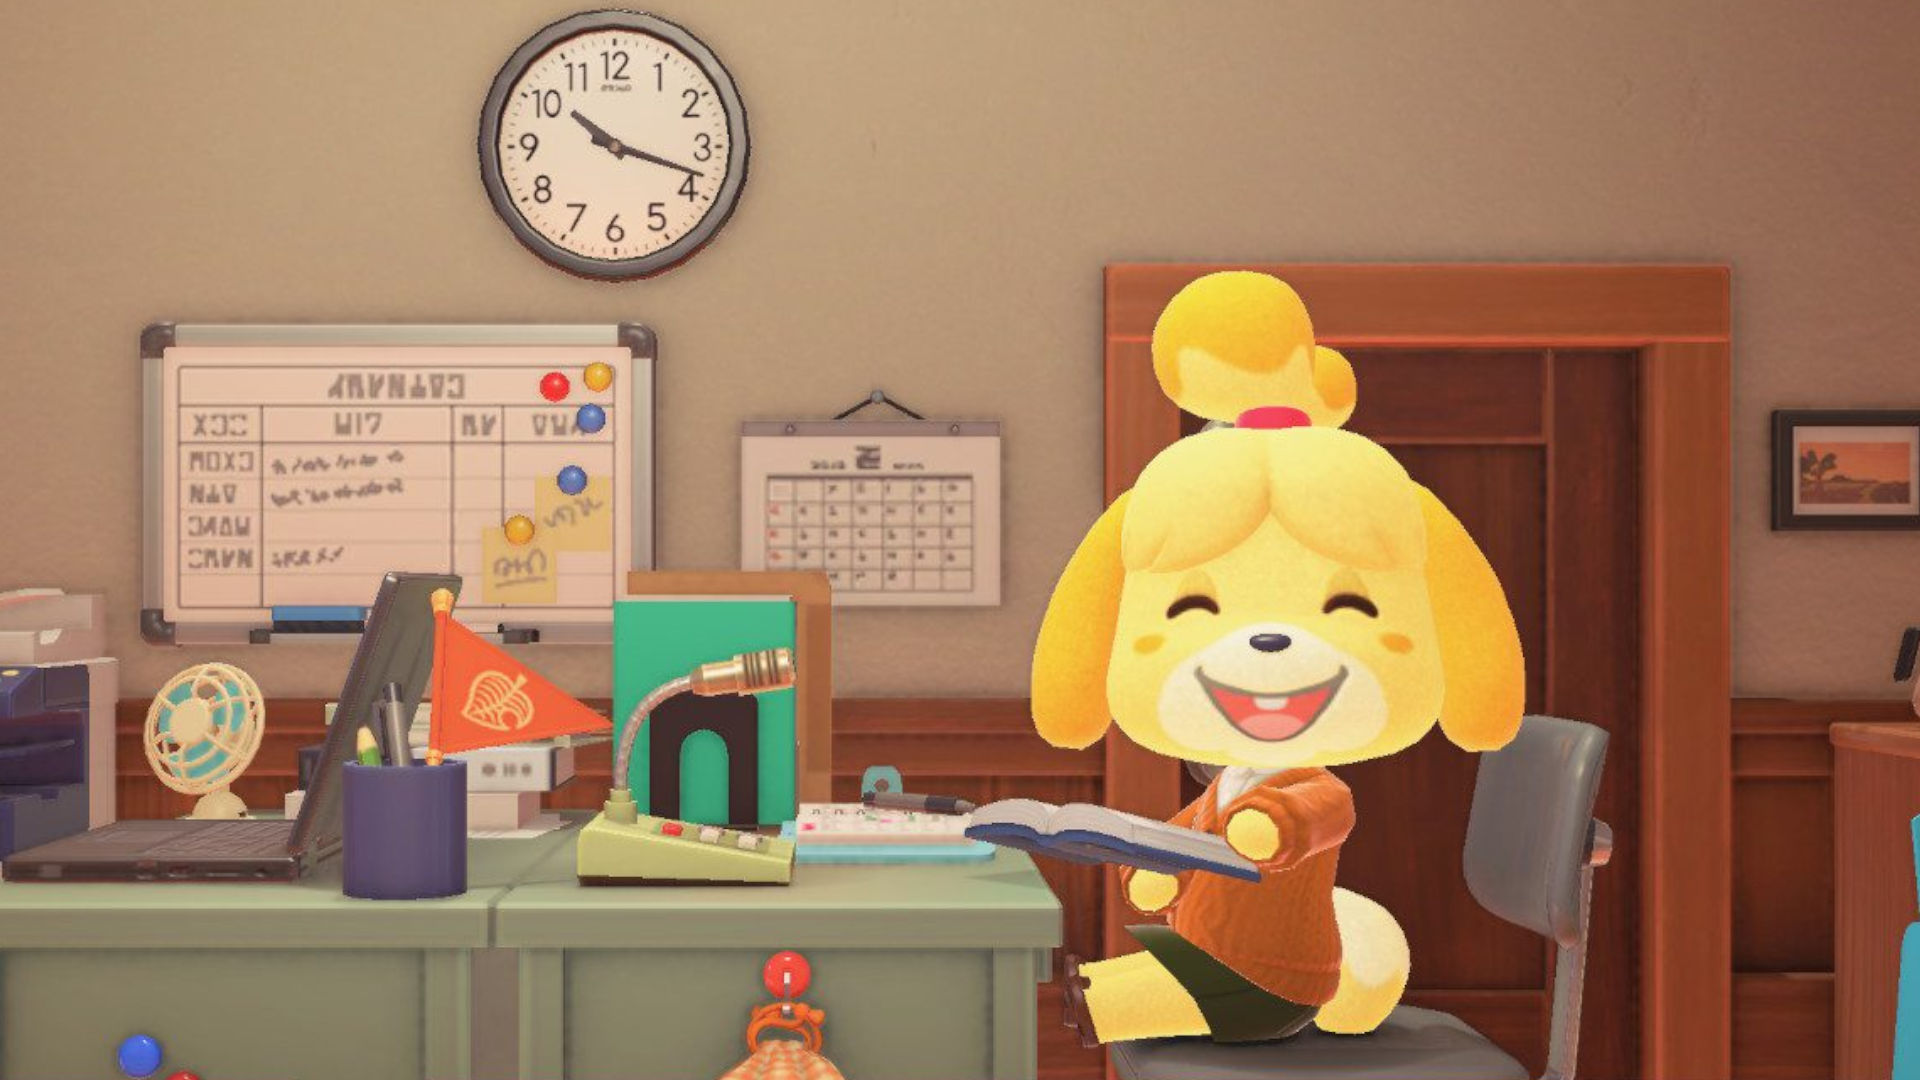 Let this Isabelle Animal Crossing smartwatch face brighten your day |  Pocket Tactics